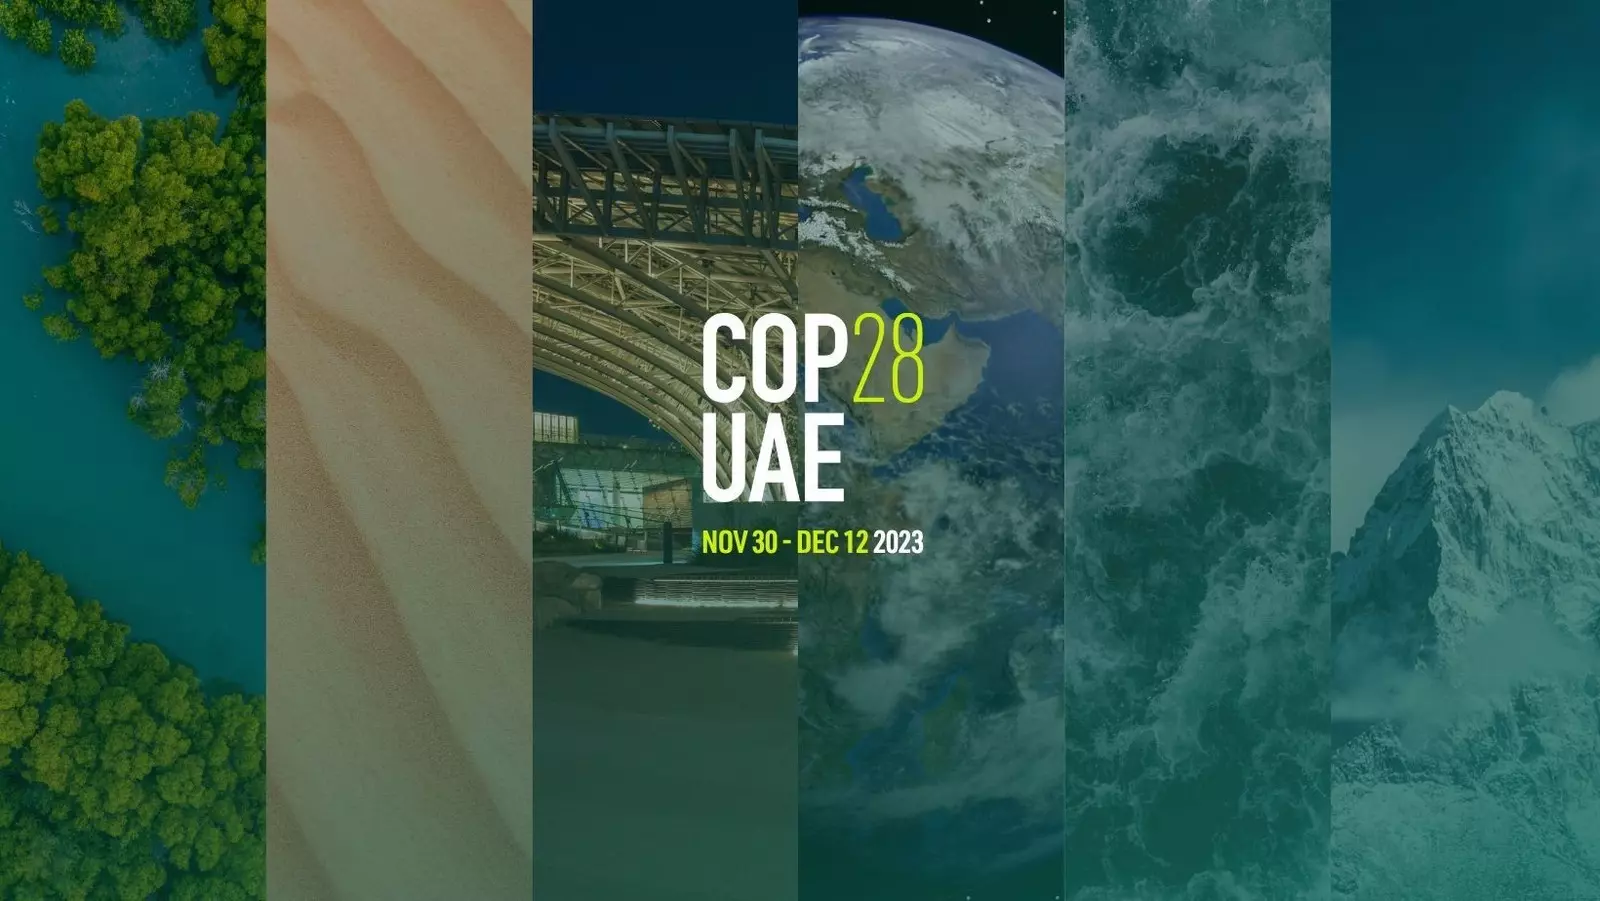 Alliance of CEO Climate Leaders share open letter to world leaders for COP28